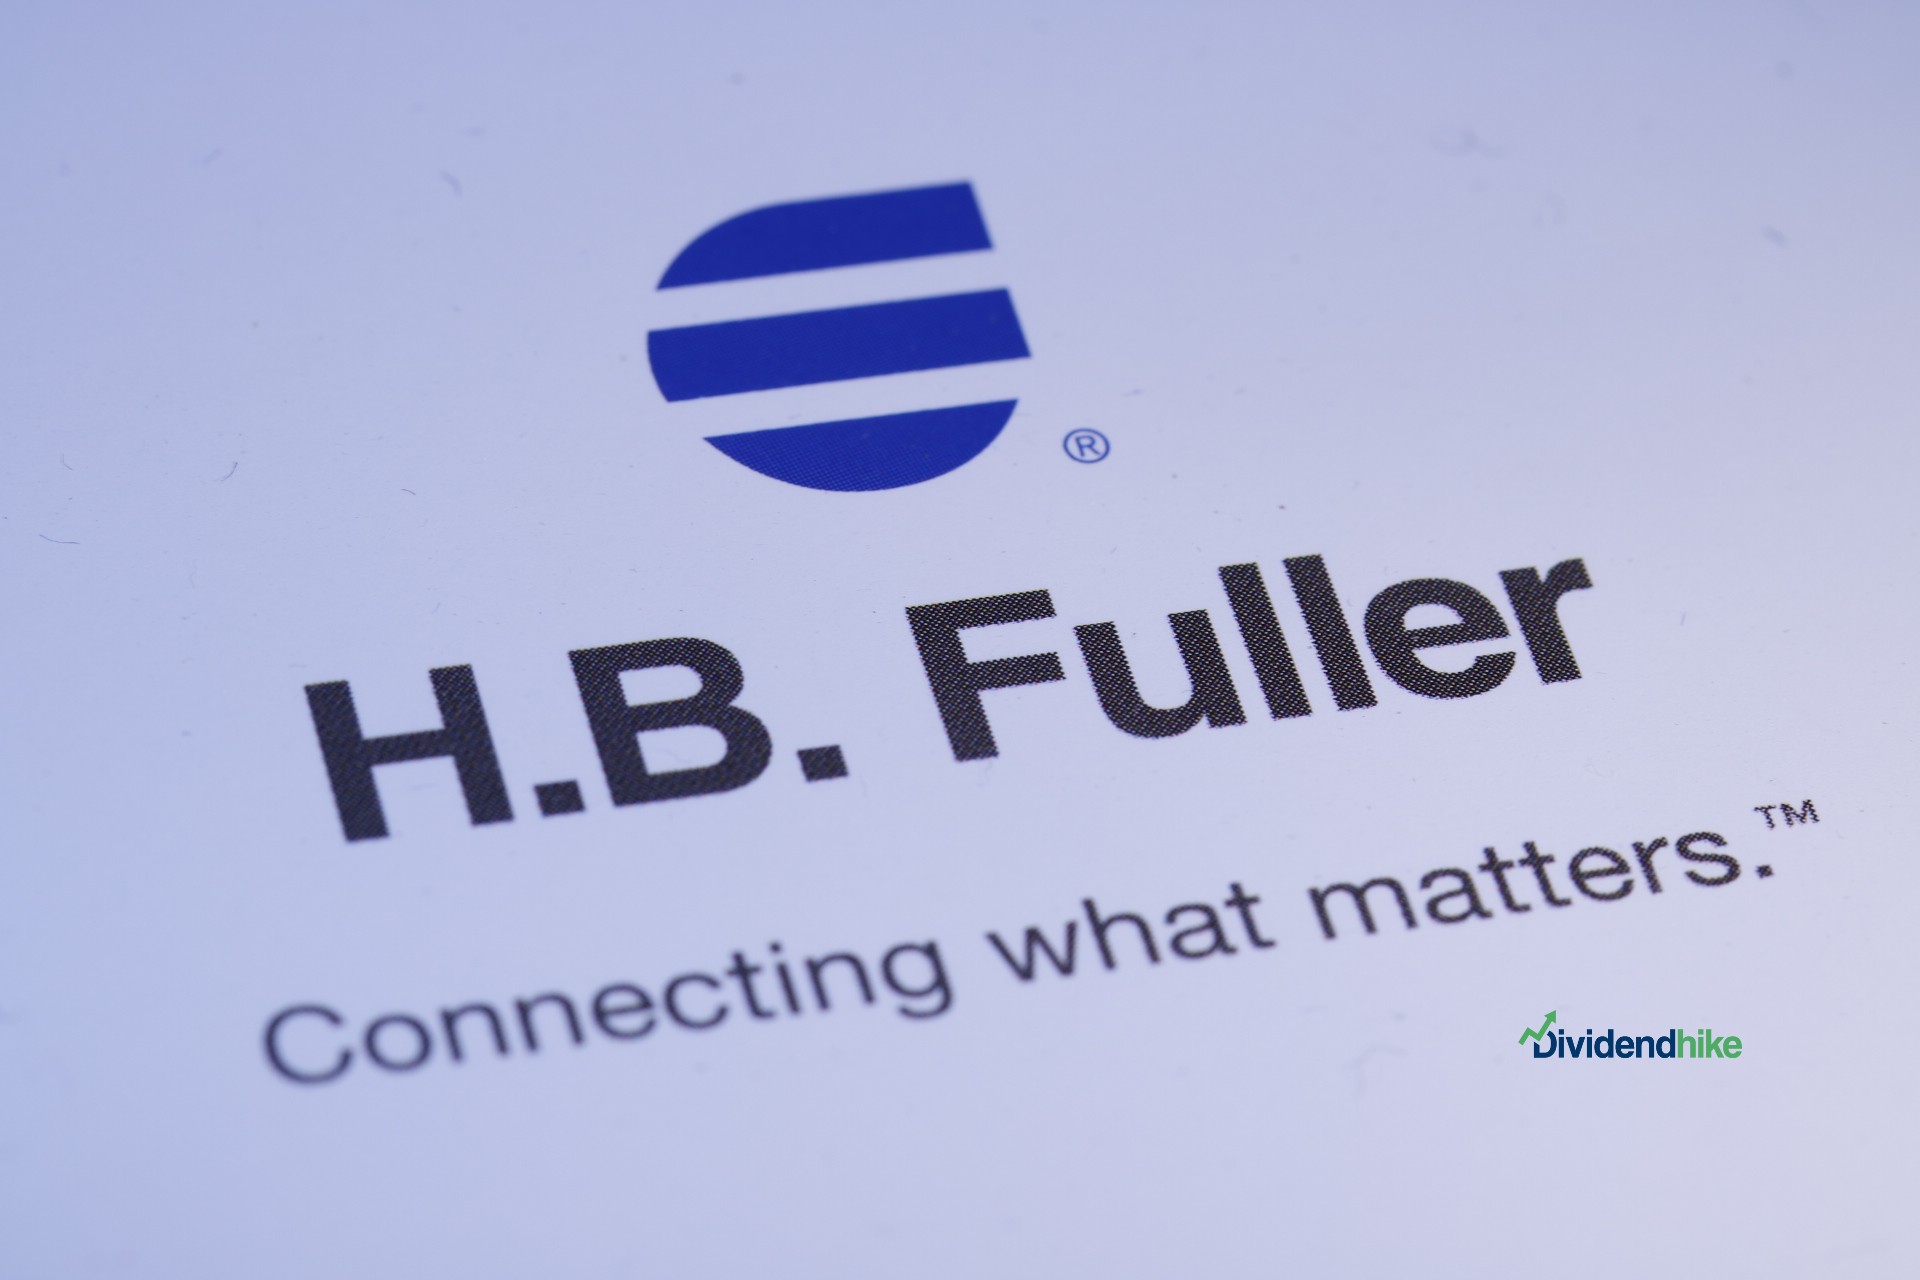 H.B. Fuller hikes dividend by 13.3%